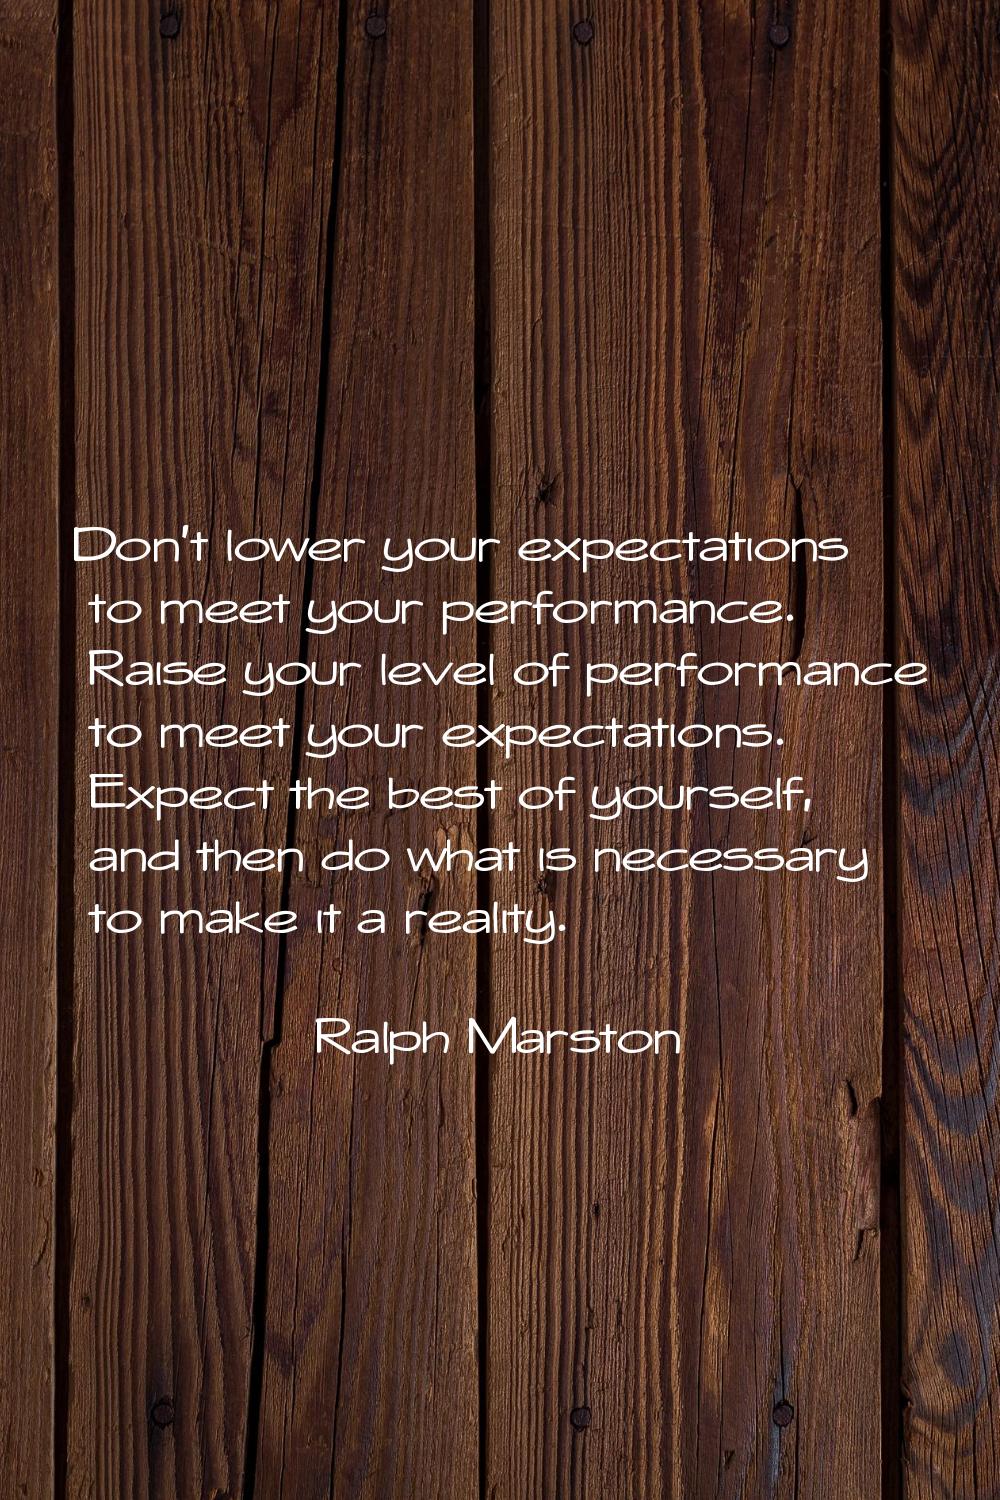 Don't lower your expectations to meet your performance. Raise your level of performance to meet you